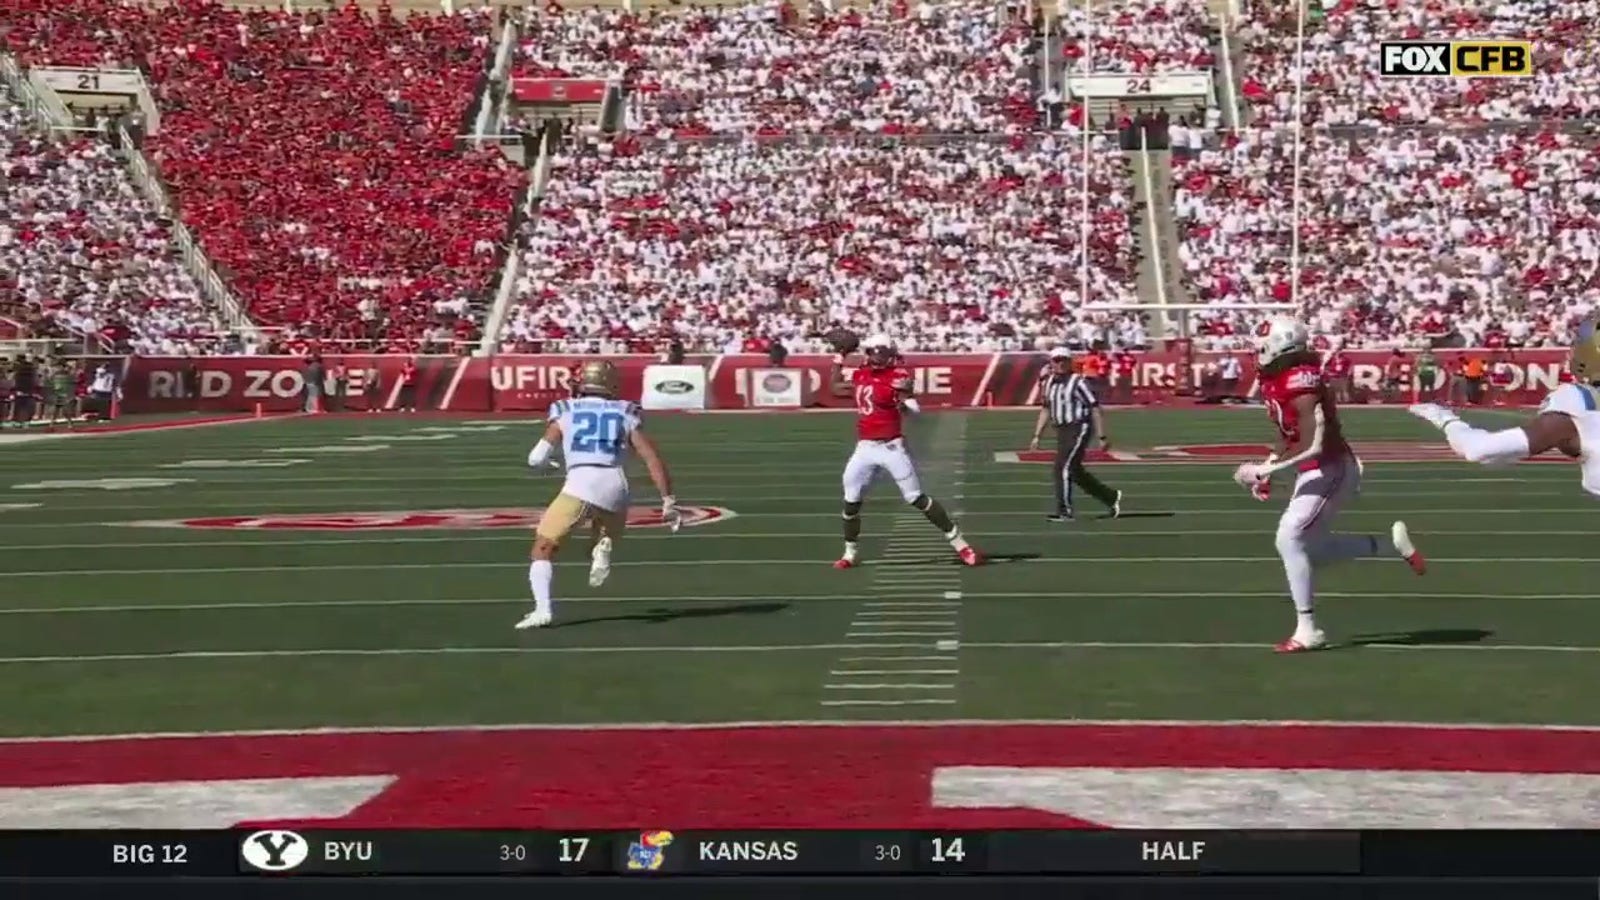 Utah's Nate Johnson connects with Landen King on beautiful 7-yard TD